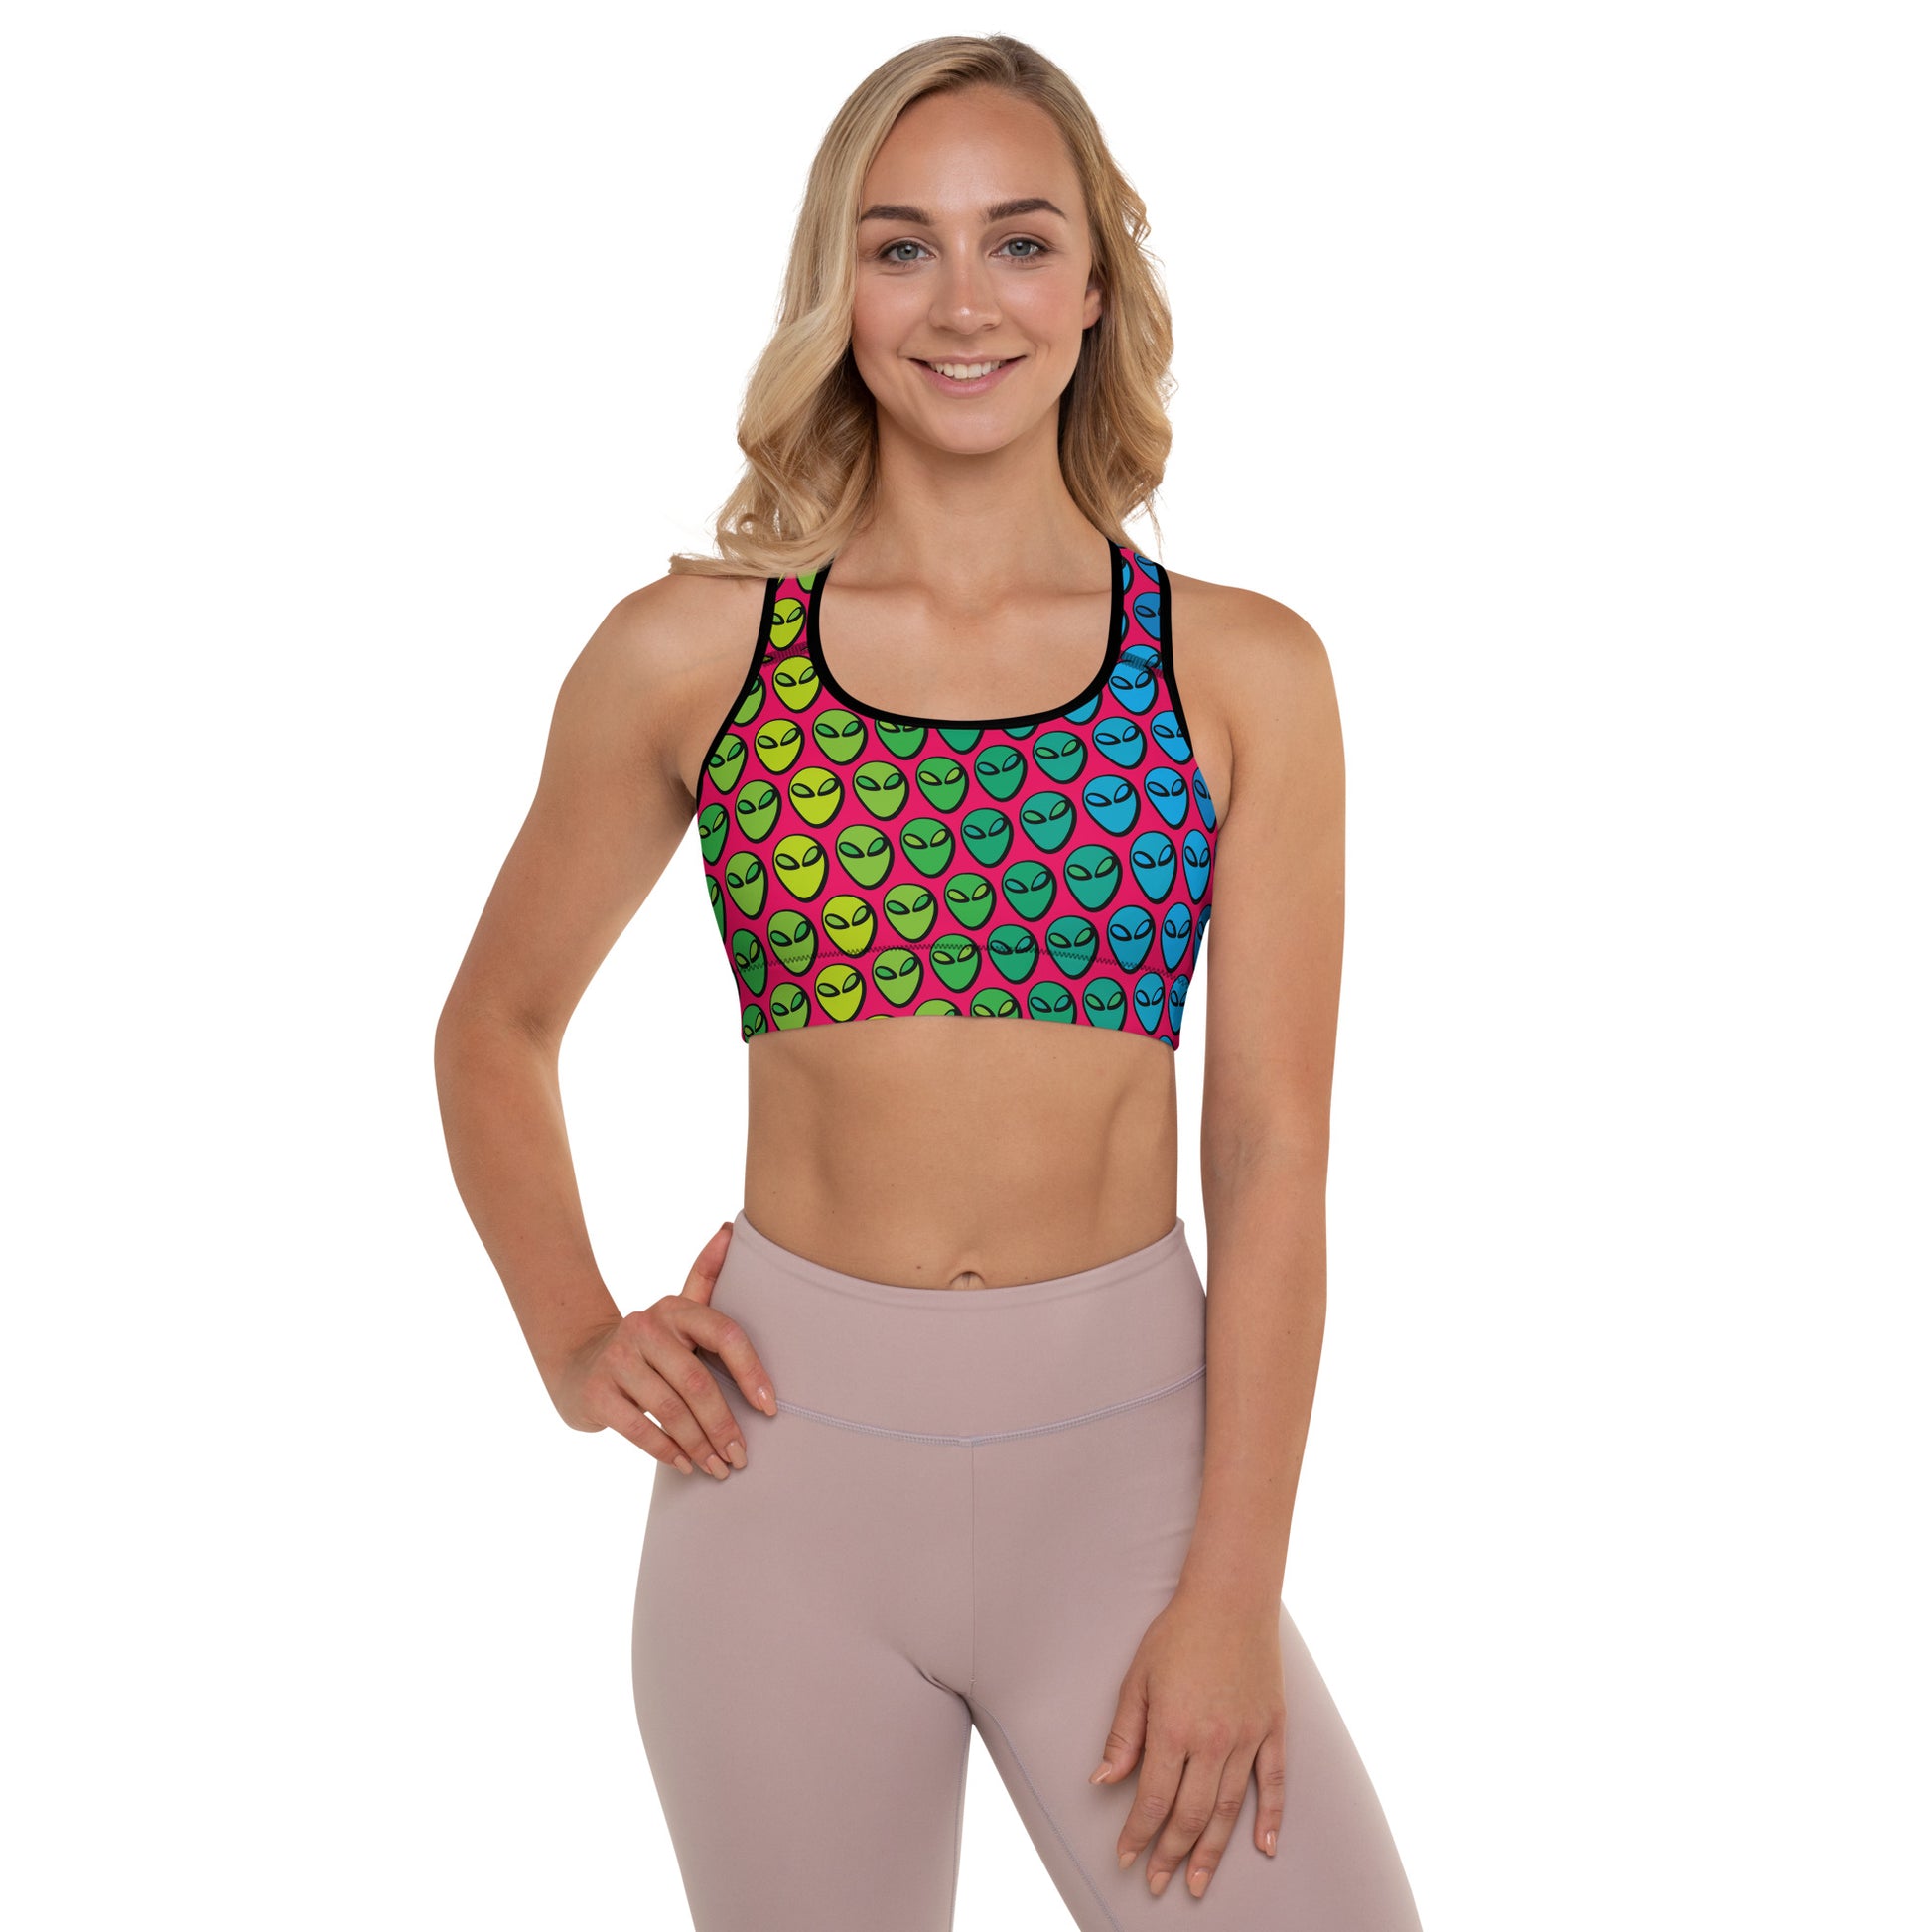 Weirdo | Sports bra with aliens printed all over! This awesome sports bra for weirdos who believe in aliens has removable pads.